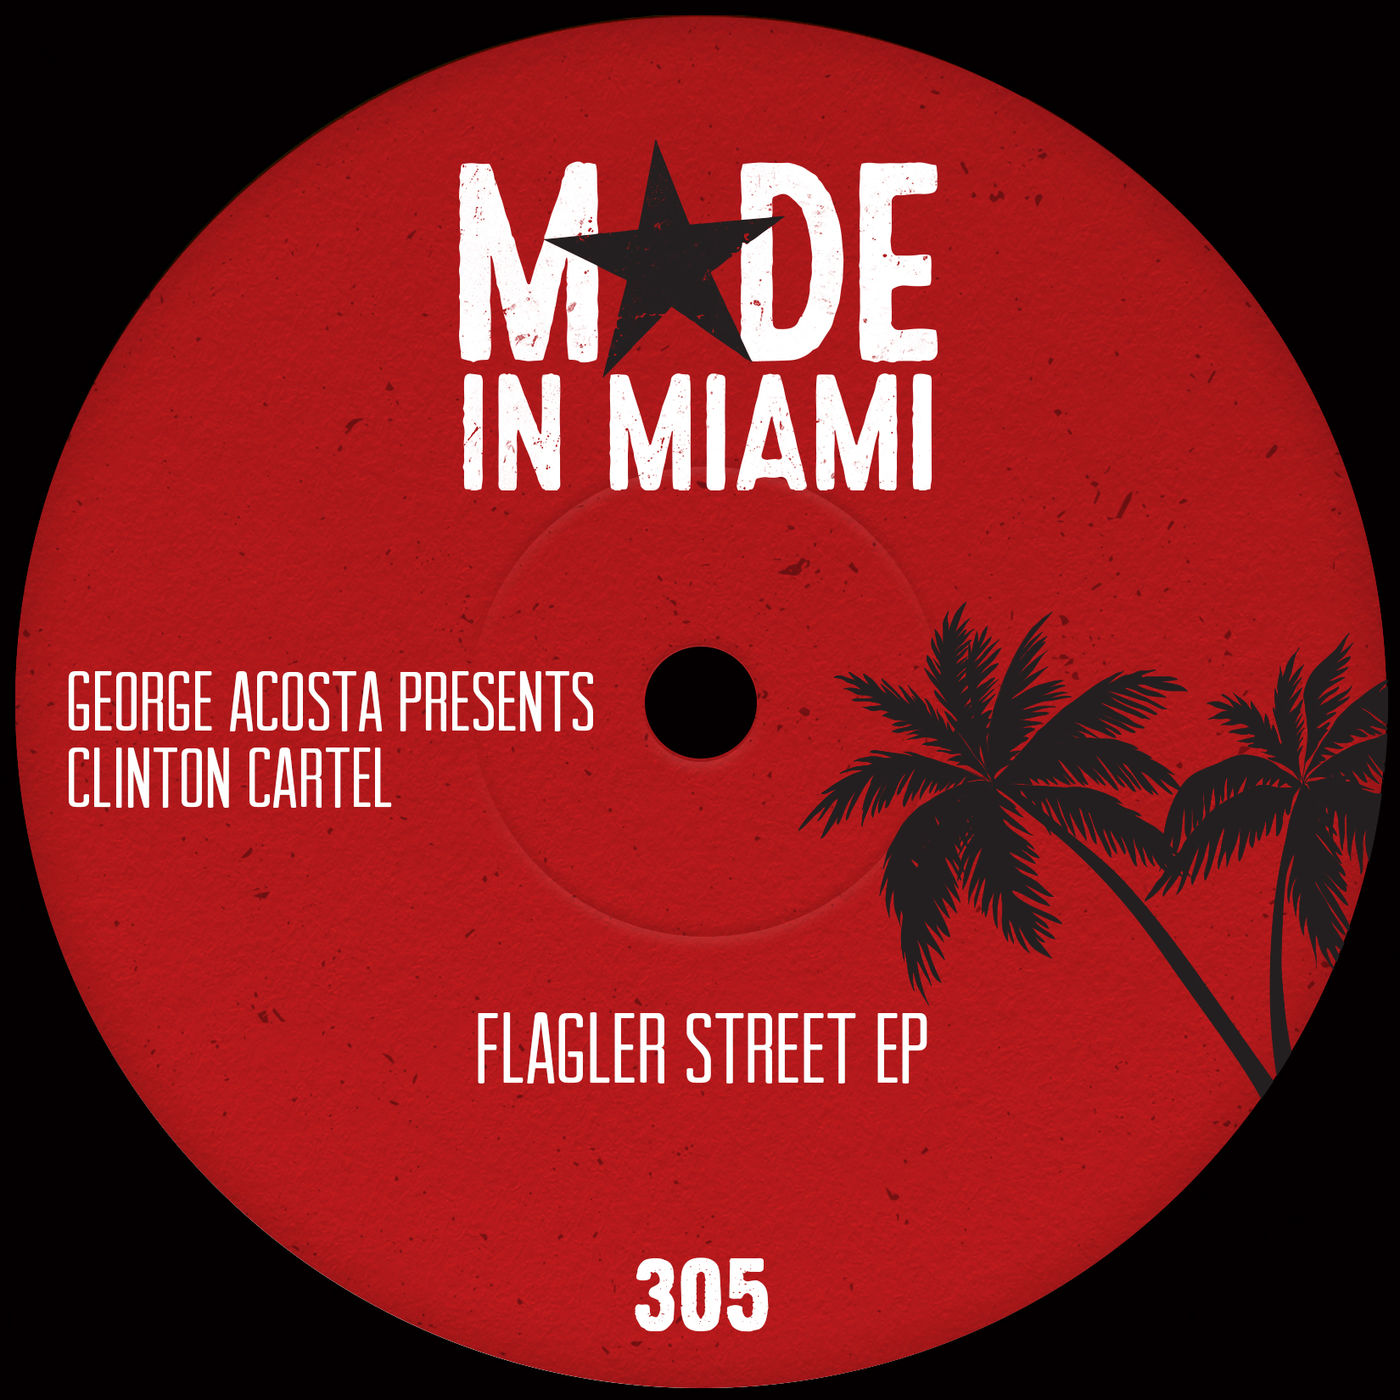 George Acosta presents Clinton Cartel - Flagler Street EP / Made In Miami